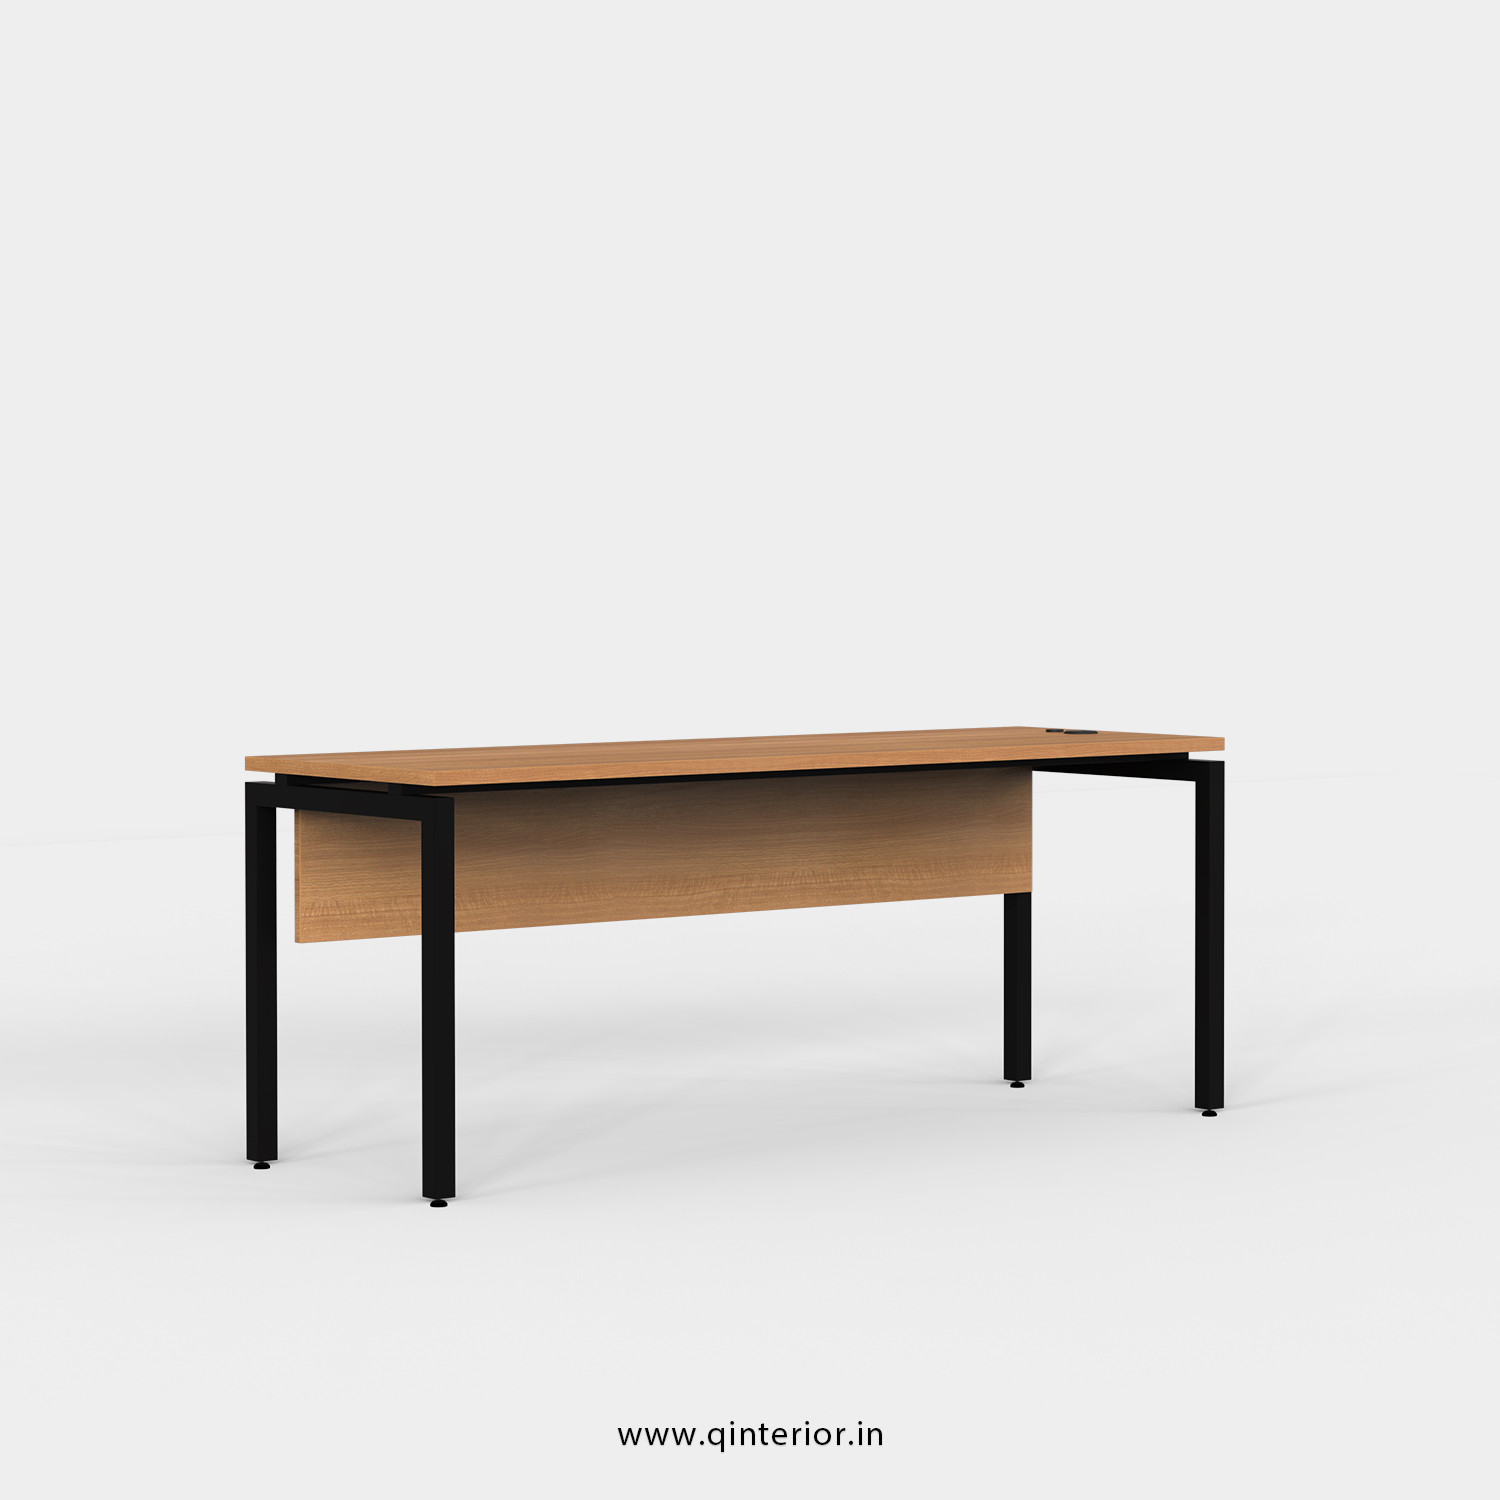 Montel Executive Table in Oak Finish - OET001 C2